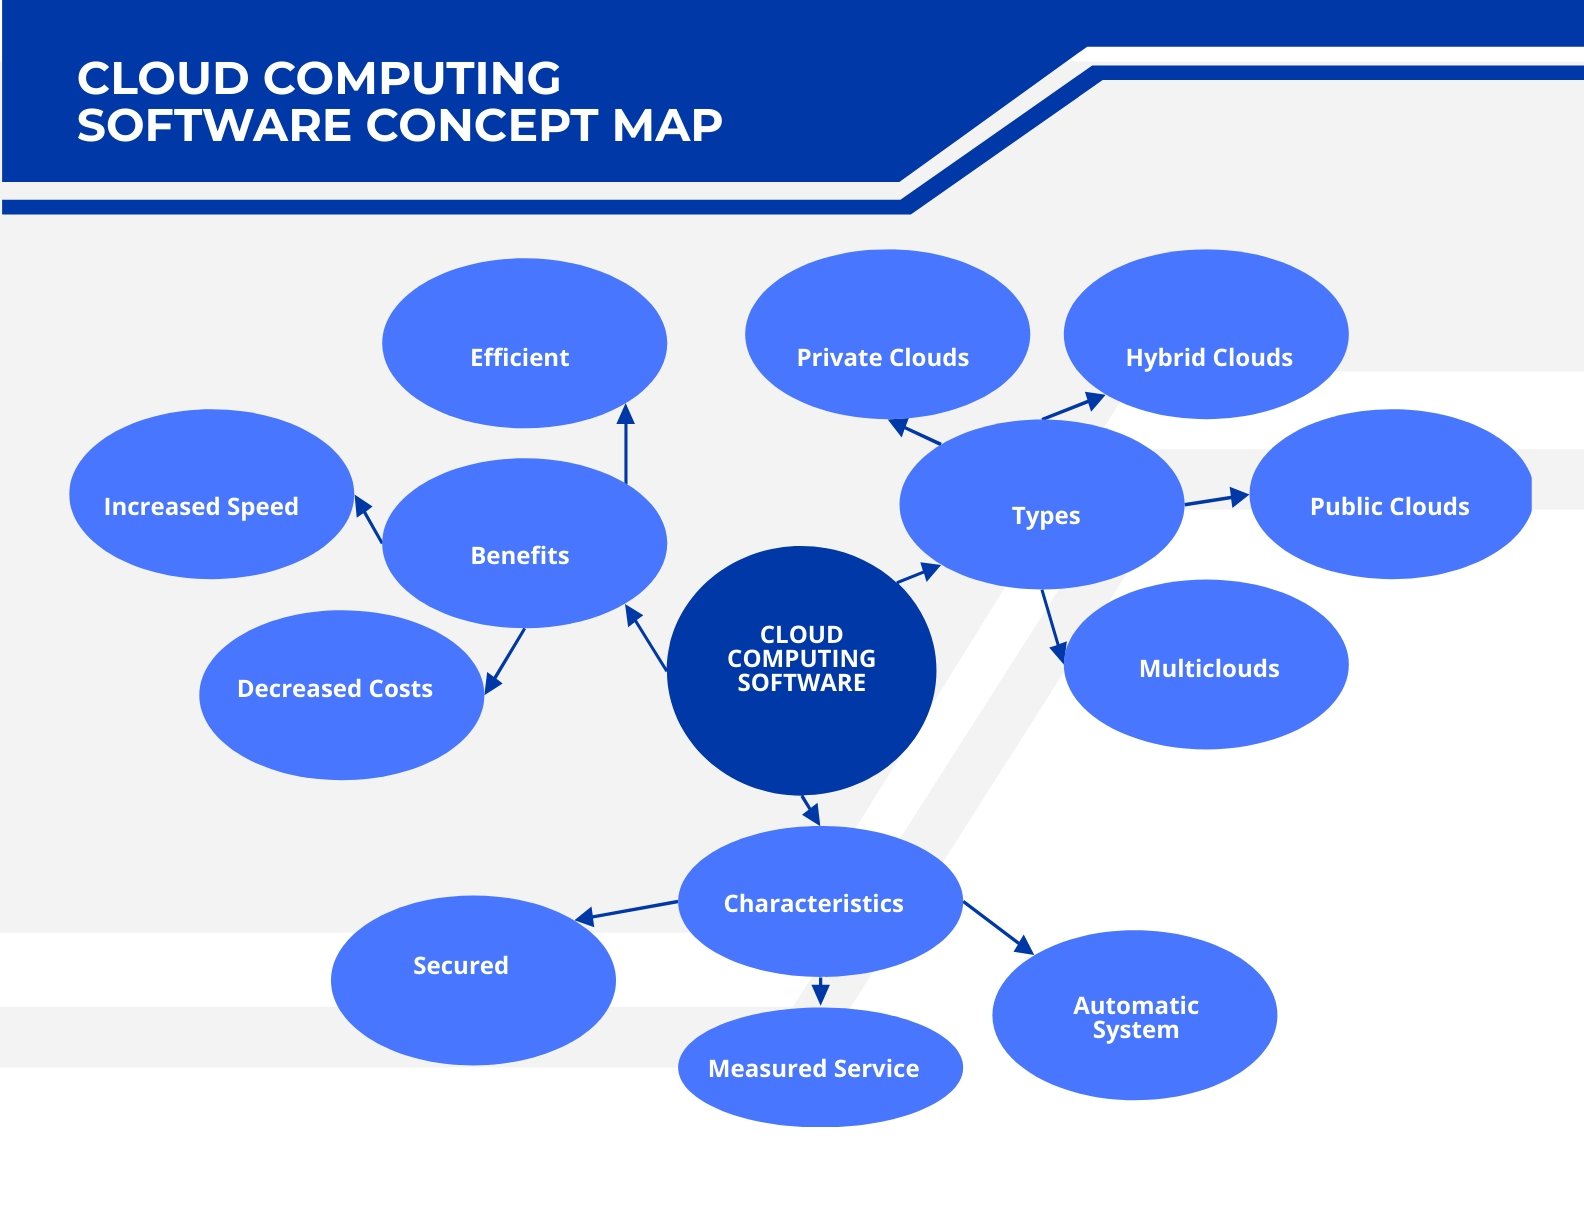 Free Cloud Computing Software Concept Map Template in Word, Google Docs